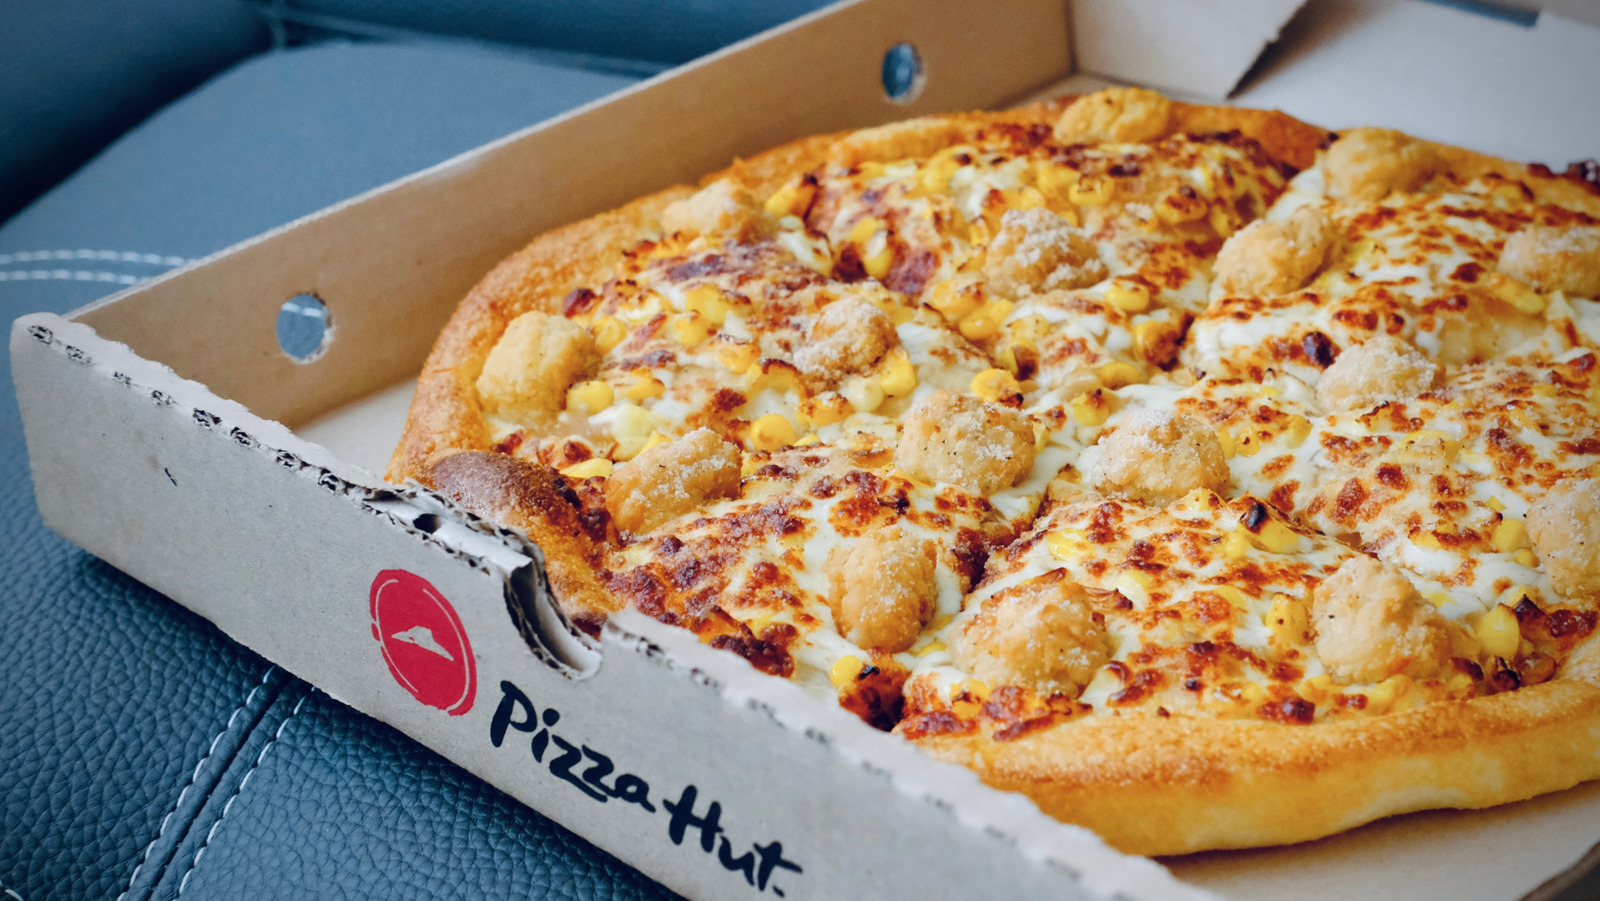 Pizza Hut's Big Dinner Box Is Back For March Madness